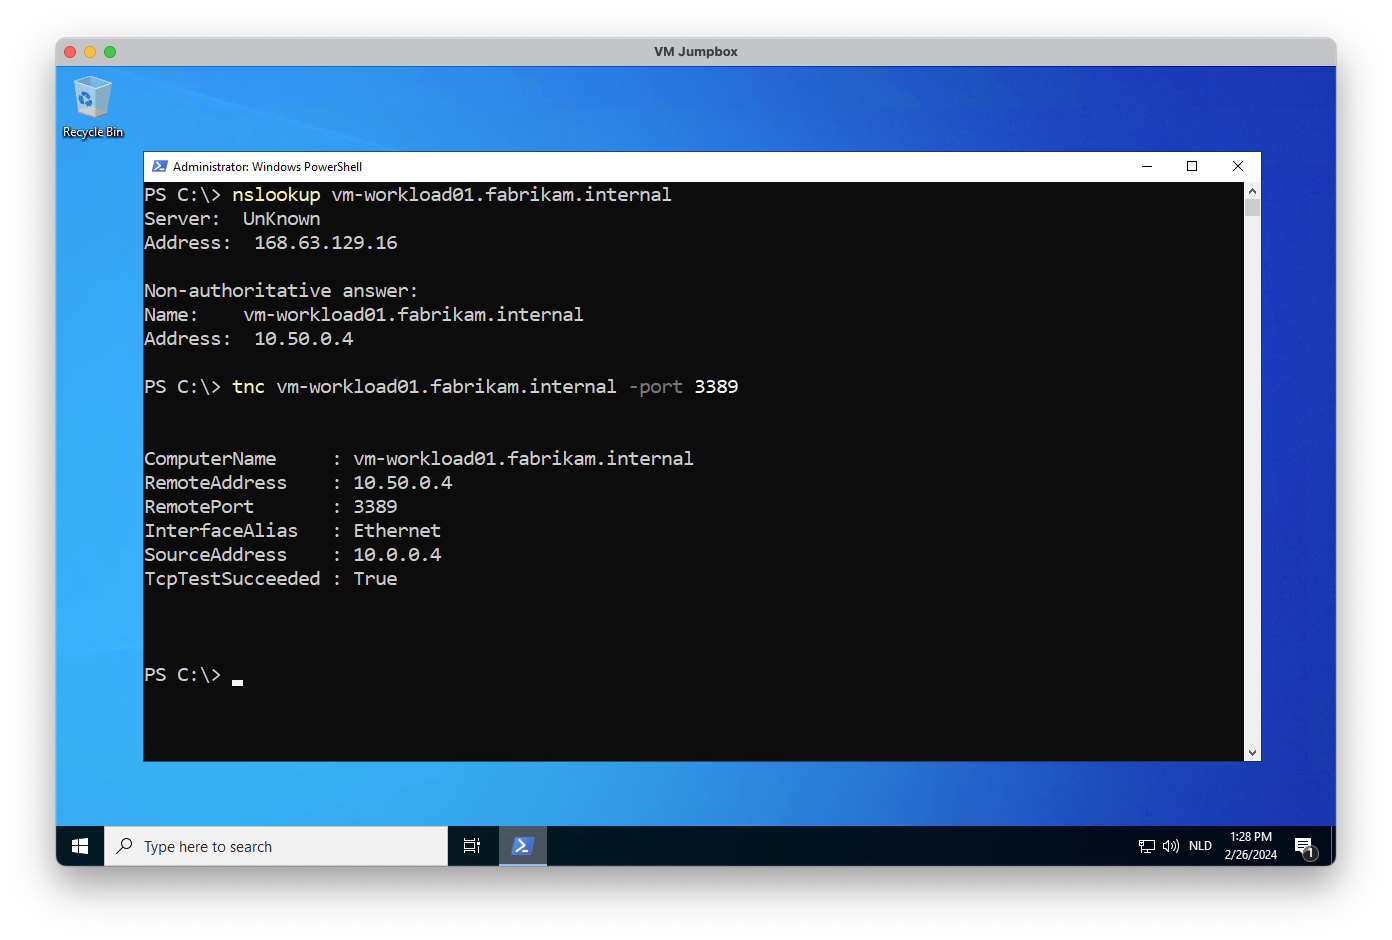 Screenshot of Azure portal showing a ping being done successfully from the hub VM to vm-workload01 via DNS.